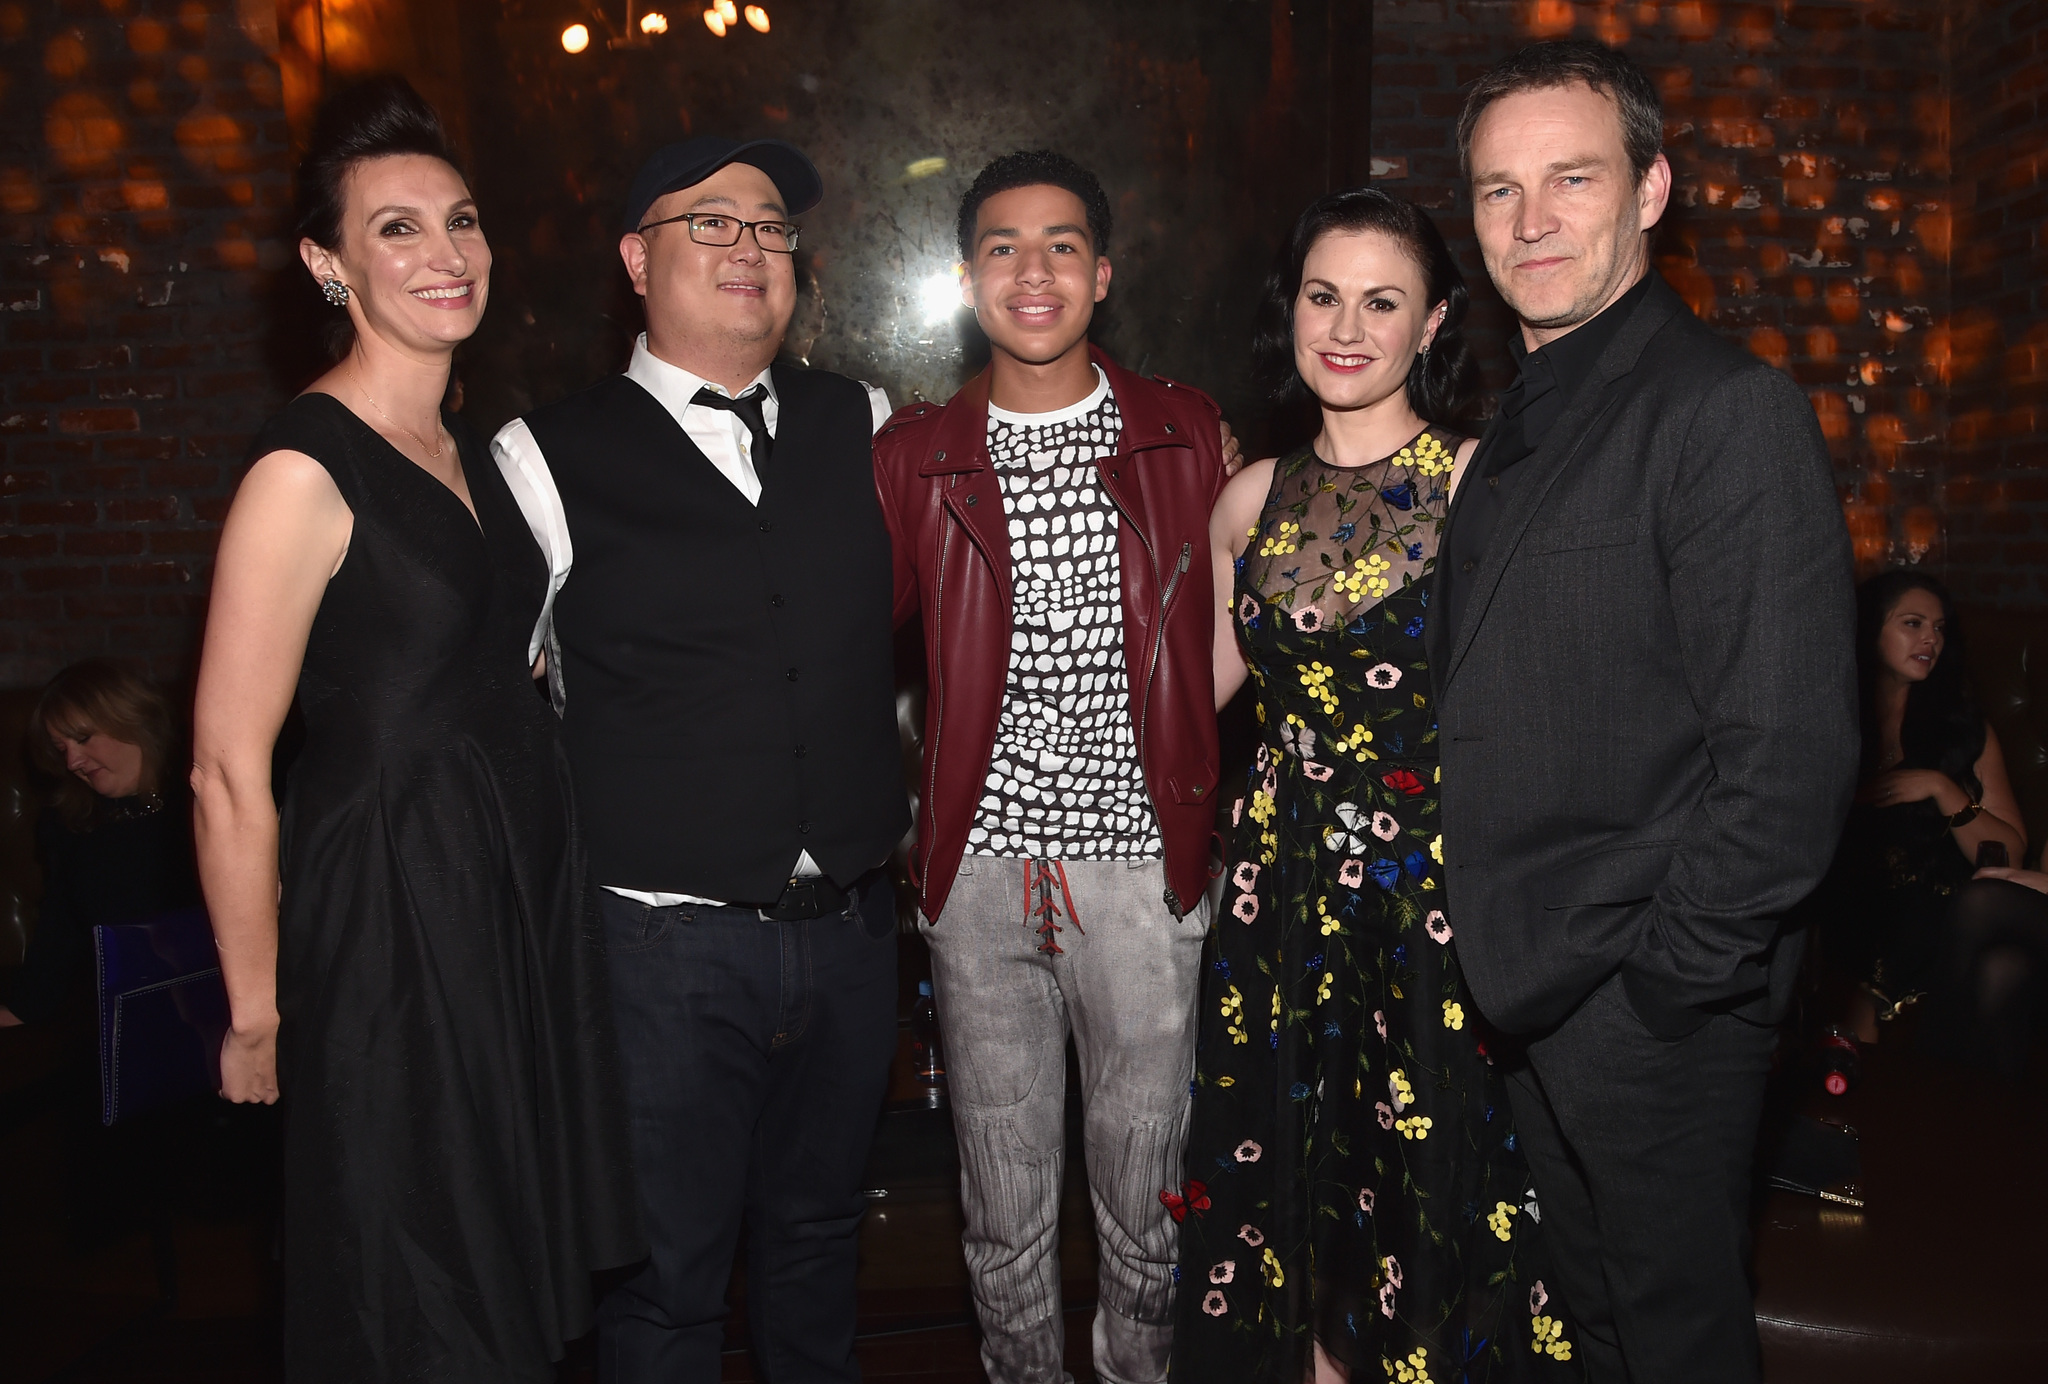 Anna Paquin, Stephen Moyer, Peter Sohn, Anna Chambers and Marcus Scribner at event of Gerasis dinozauras (2015)